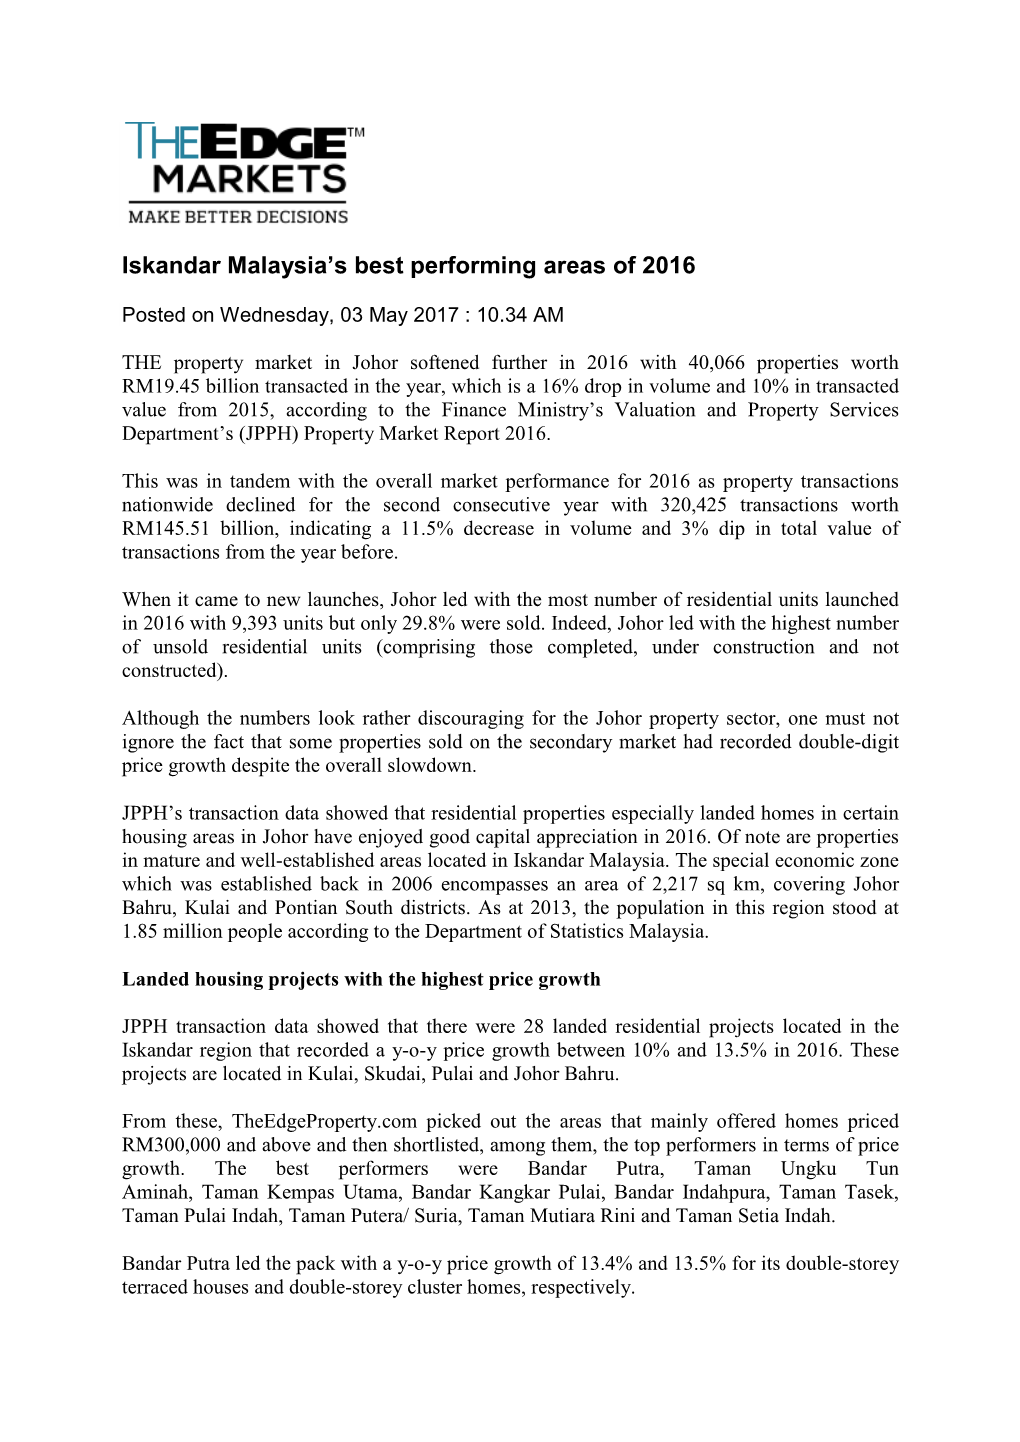 Iskandar Malaysia's Best Performing Areas of 2016